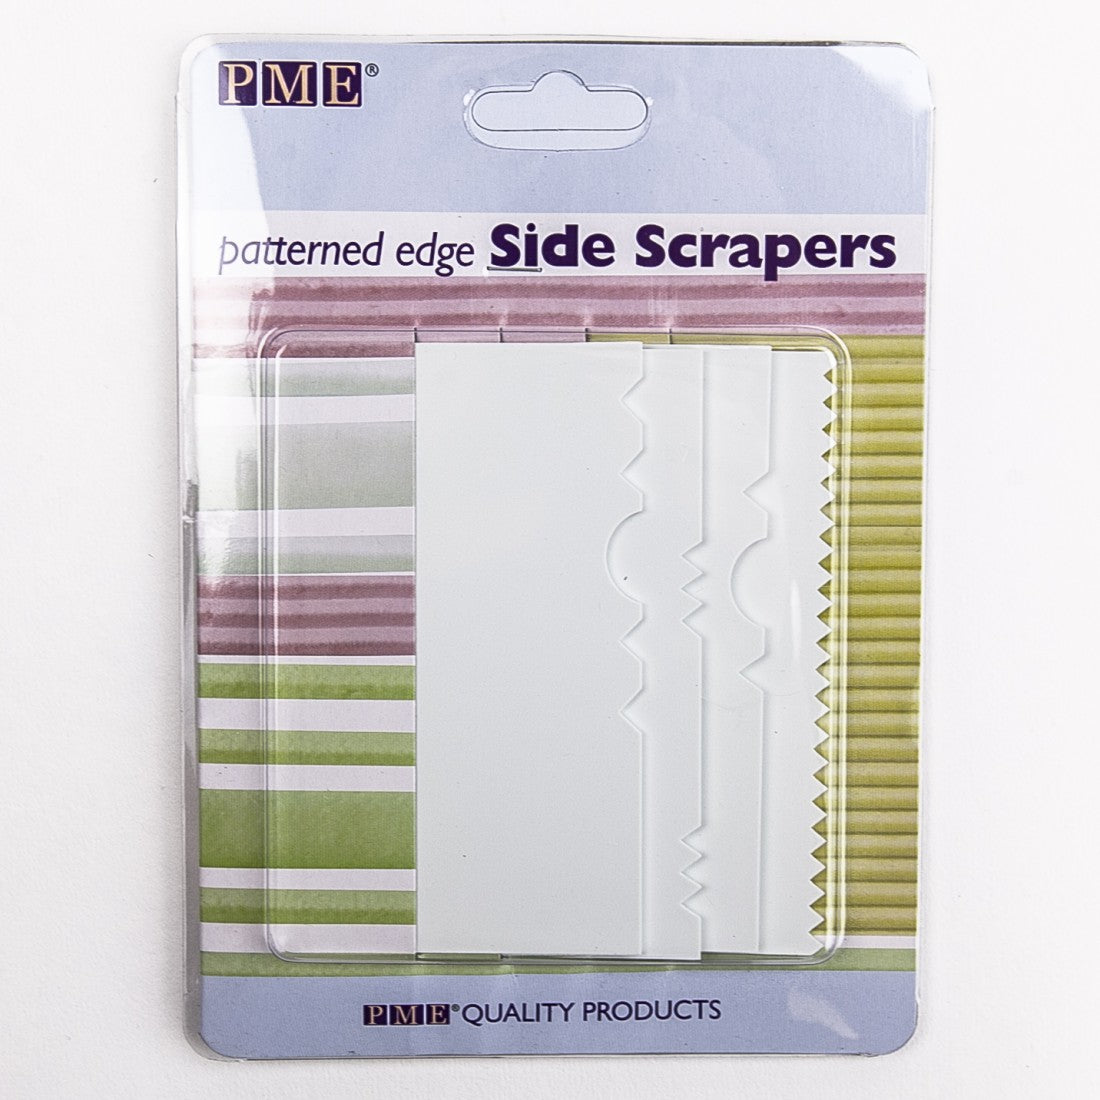 PME Patterned Edge Side Scrapers